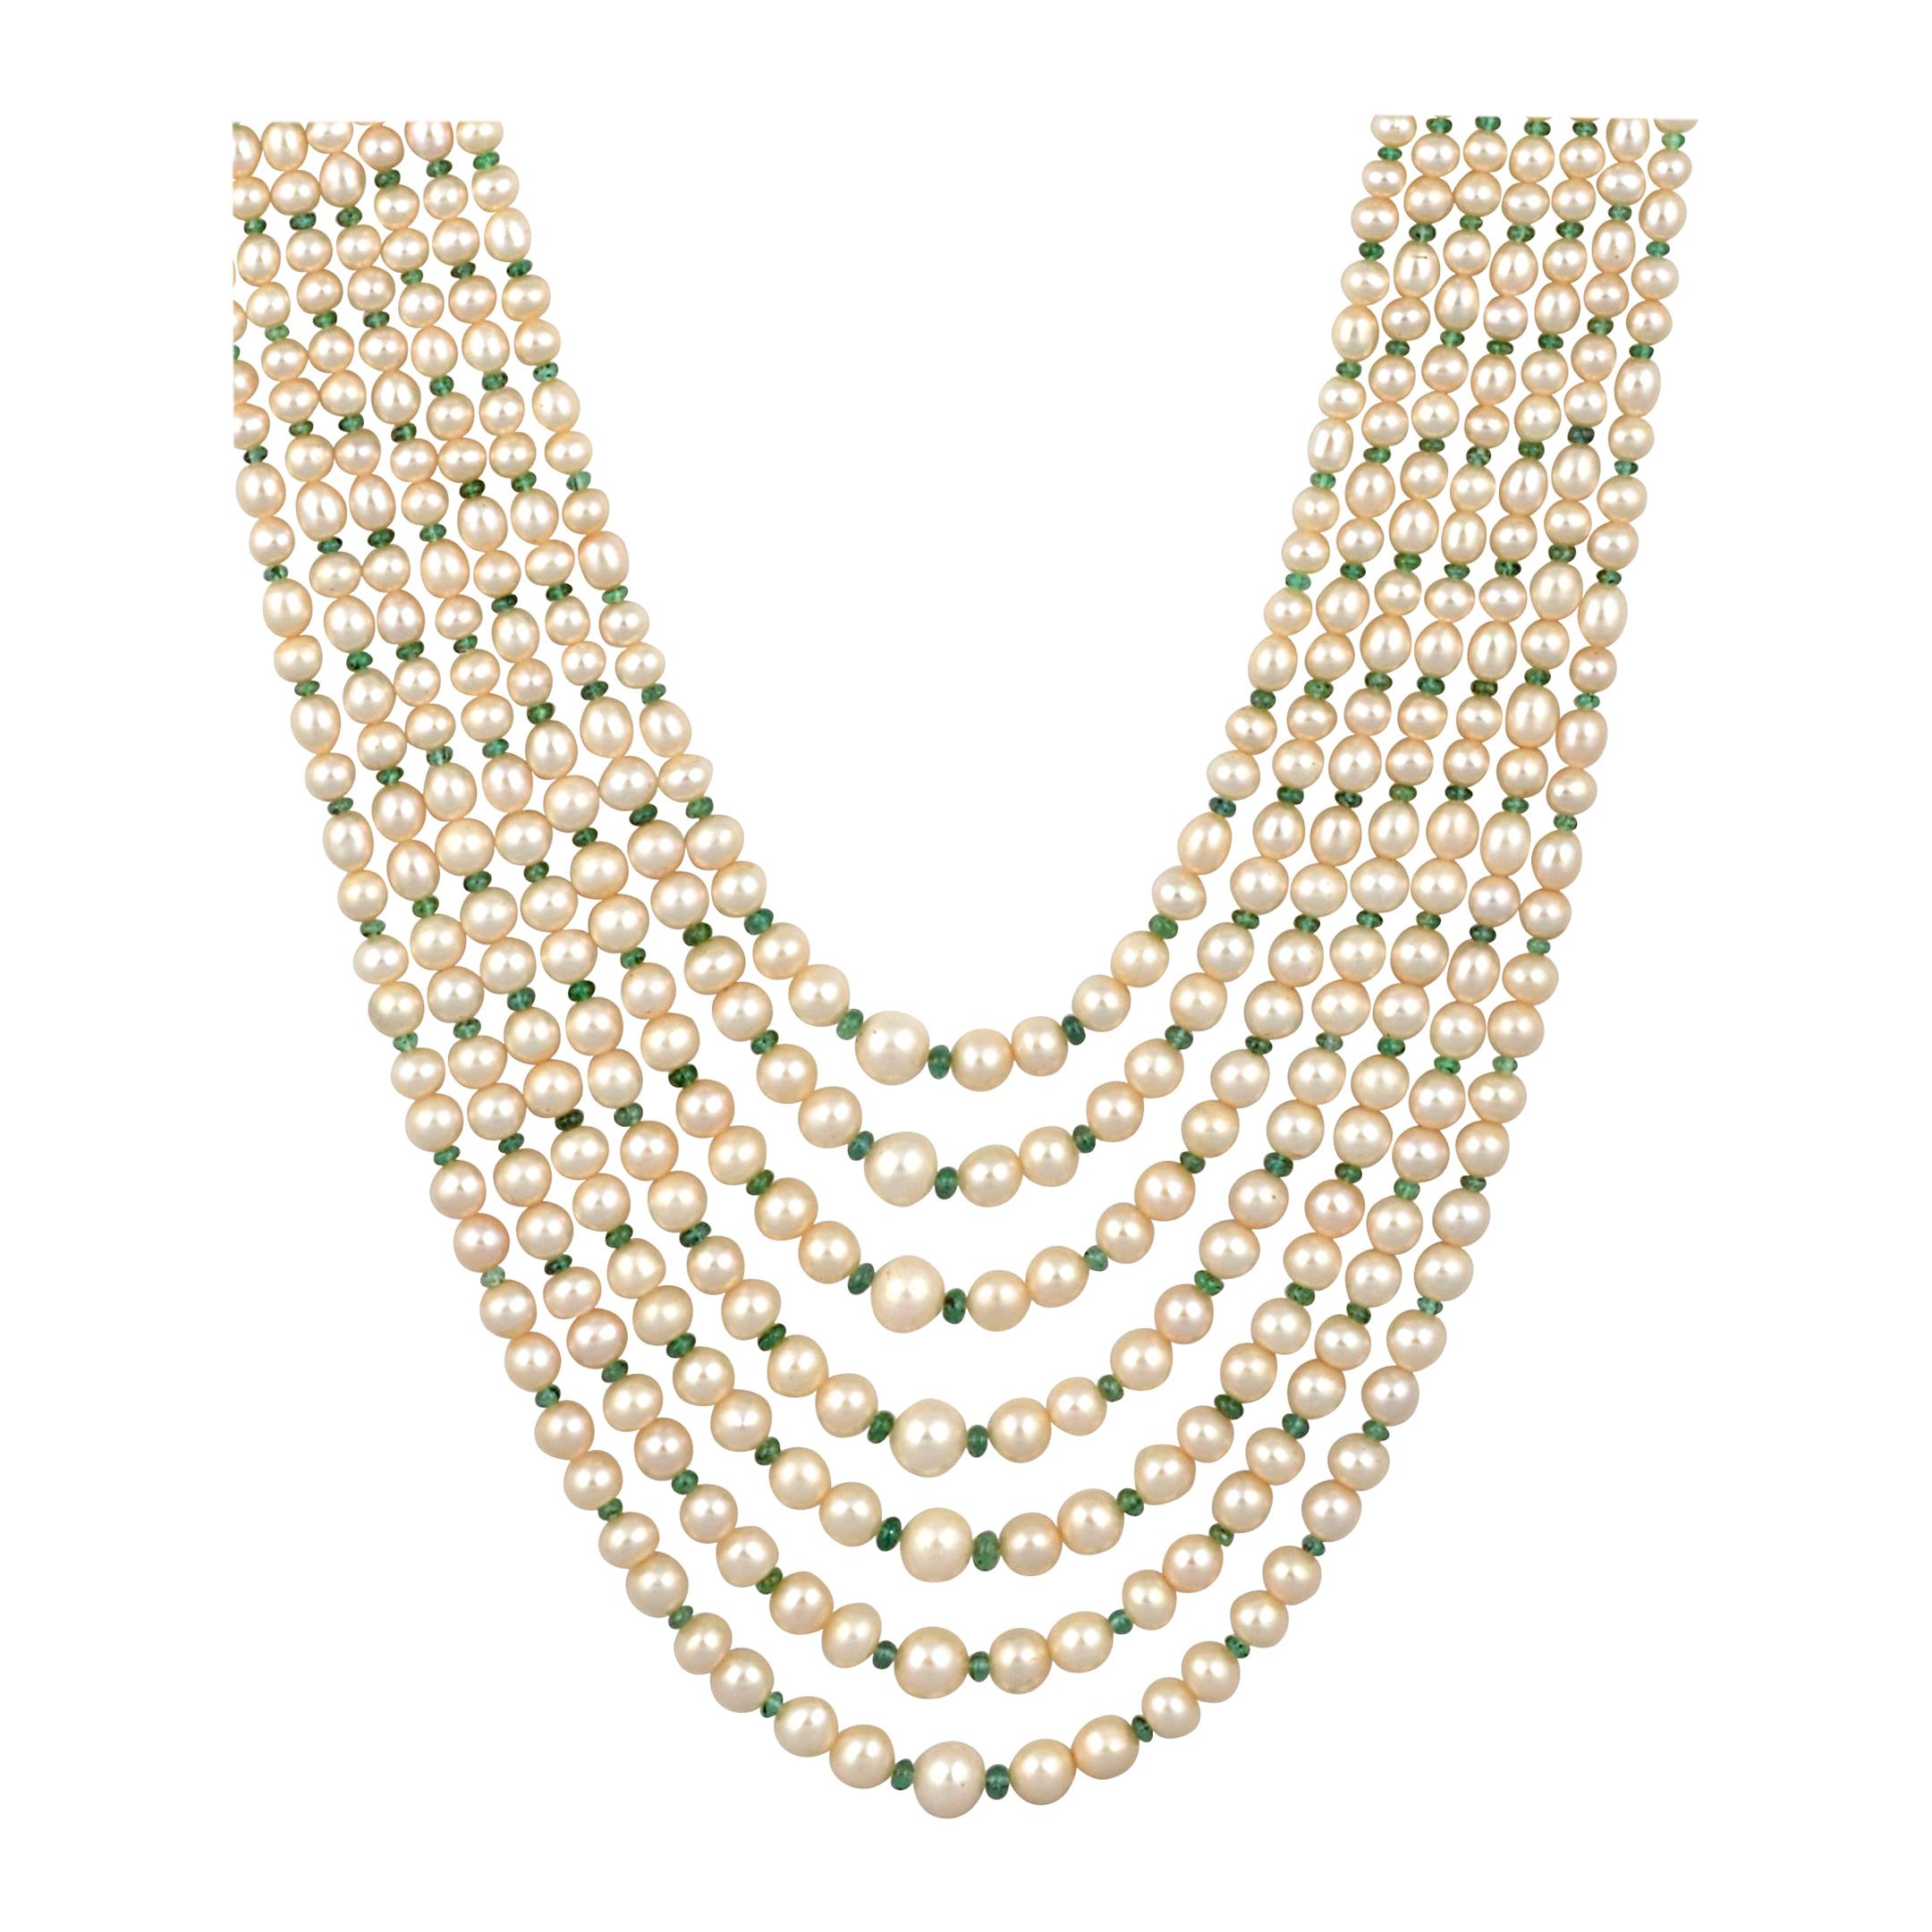 7Layer Fresh Water Pearl , Emerald Bead + 14K Spacer Clasp Opera Length Necklace For Sale